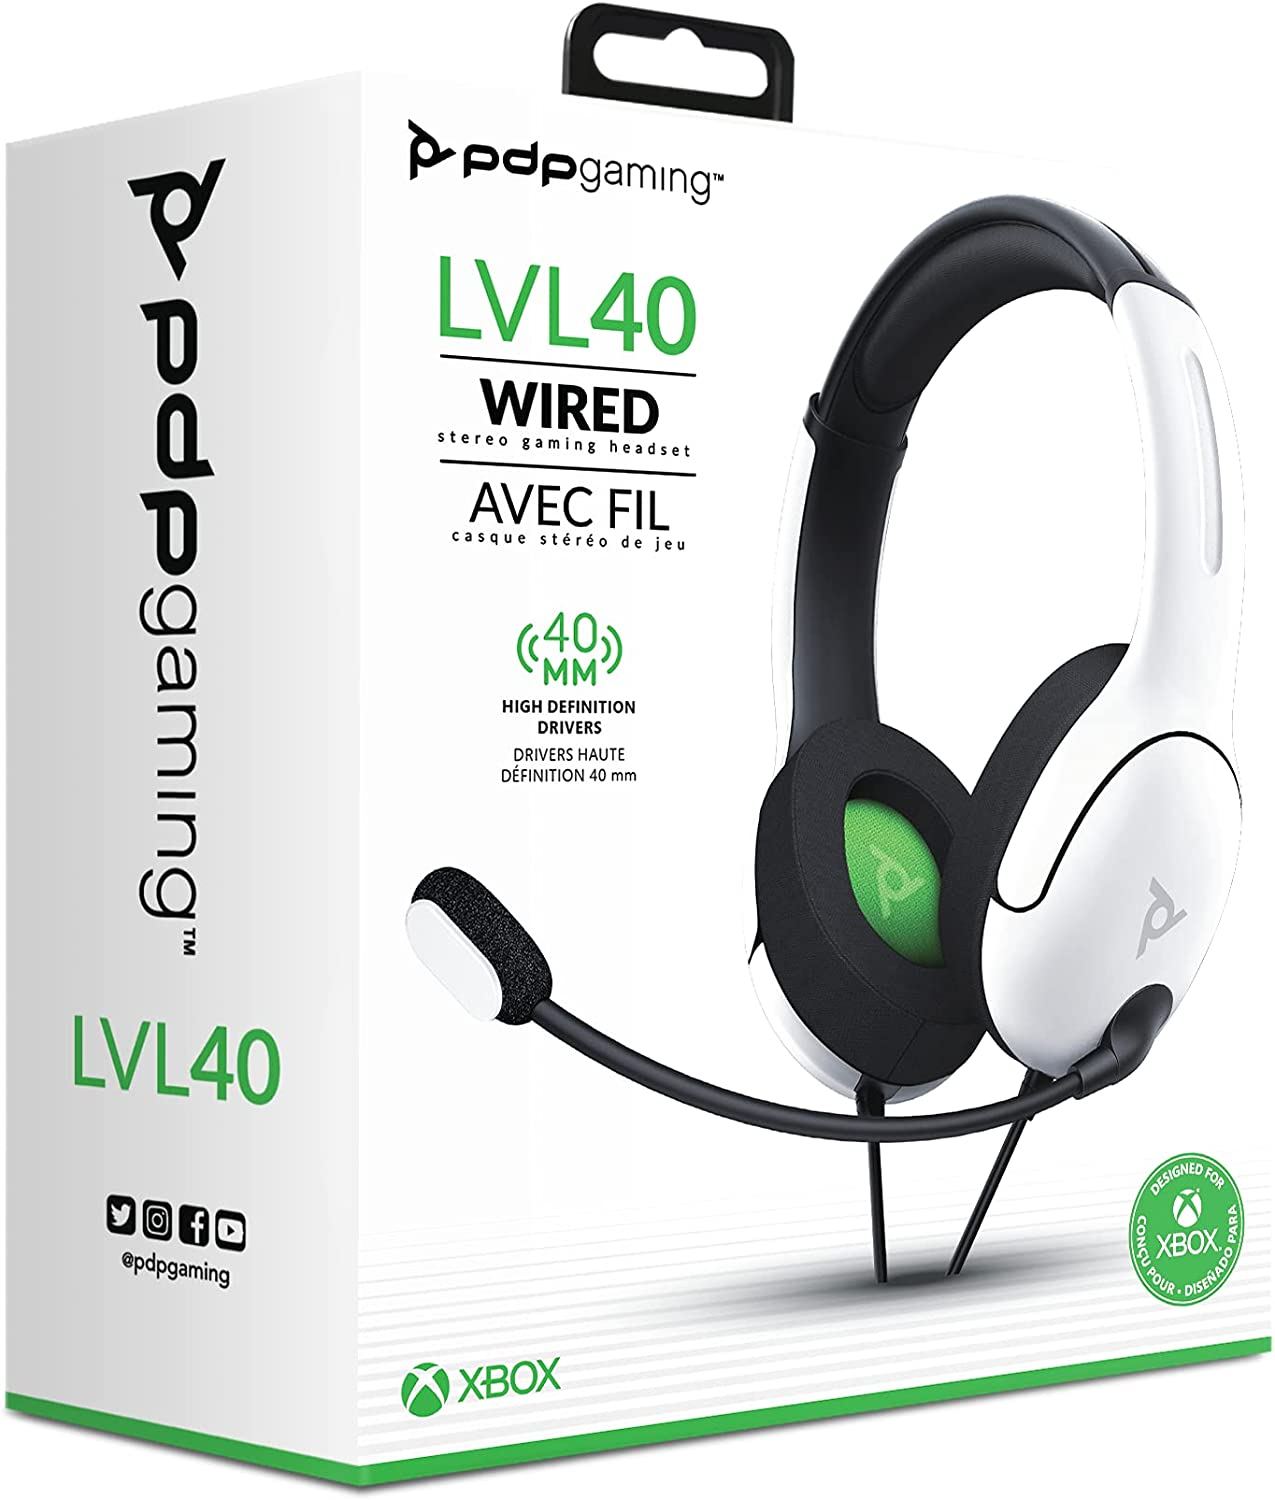 PDP Gaming LVL40 Wired Stereo Gaming Headset for Xbox One / Xbox